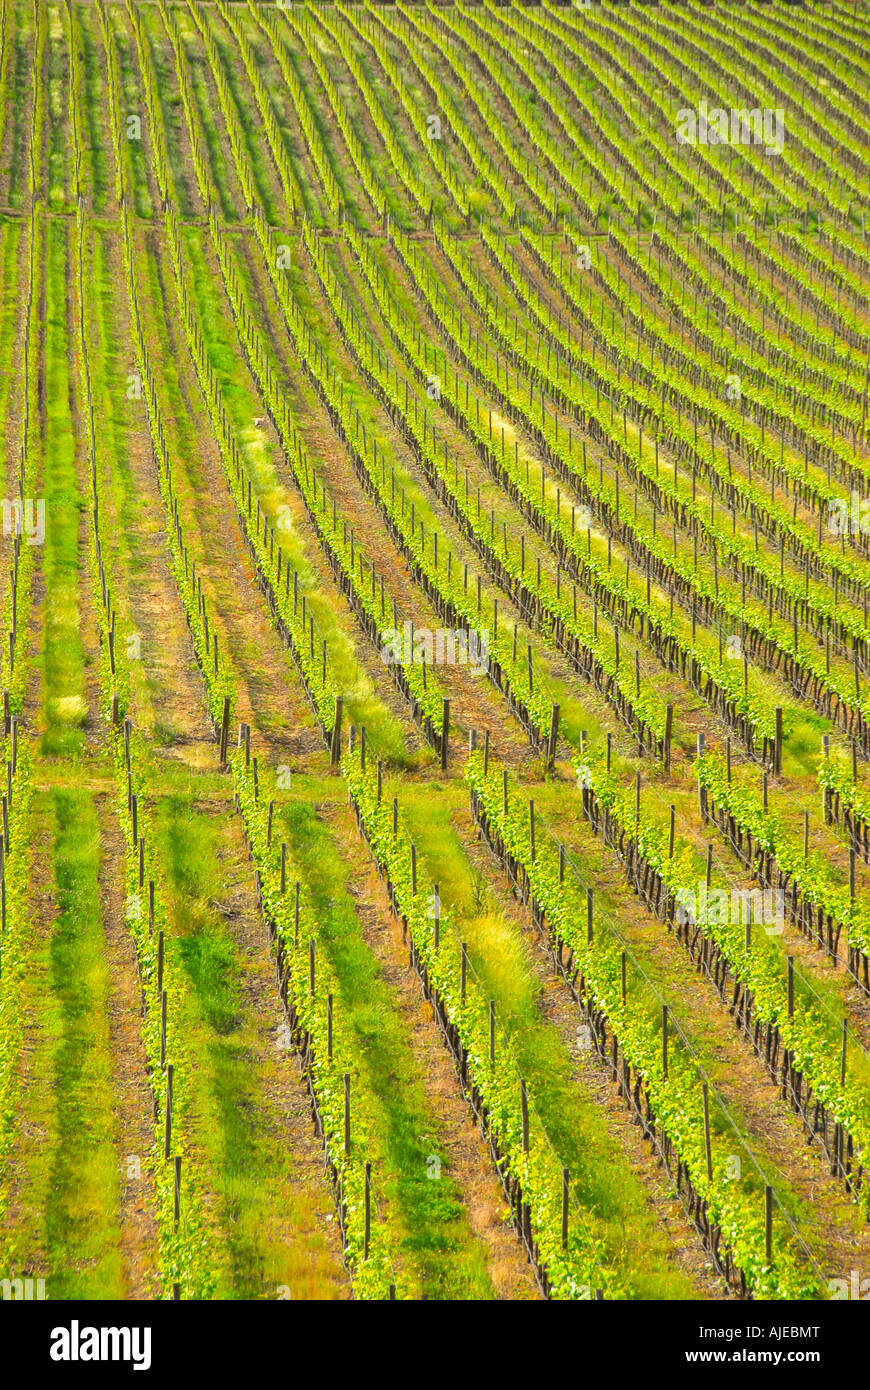 aerial view chile chilean countryside vineyard tourist destination chile chilean countryside wine country panoramic scenic Stock Photo